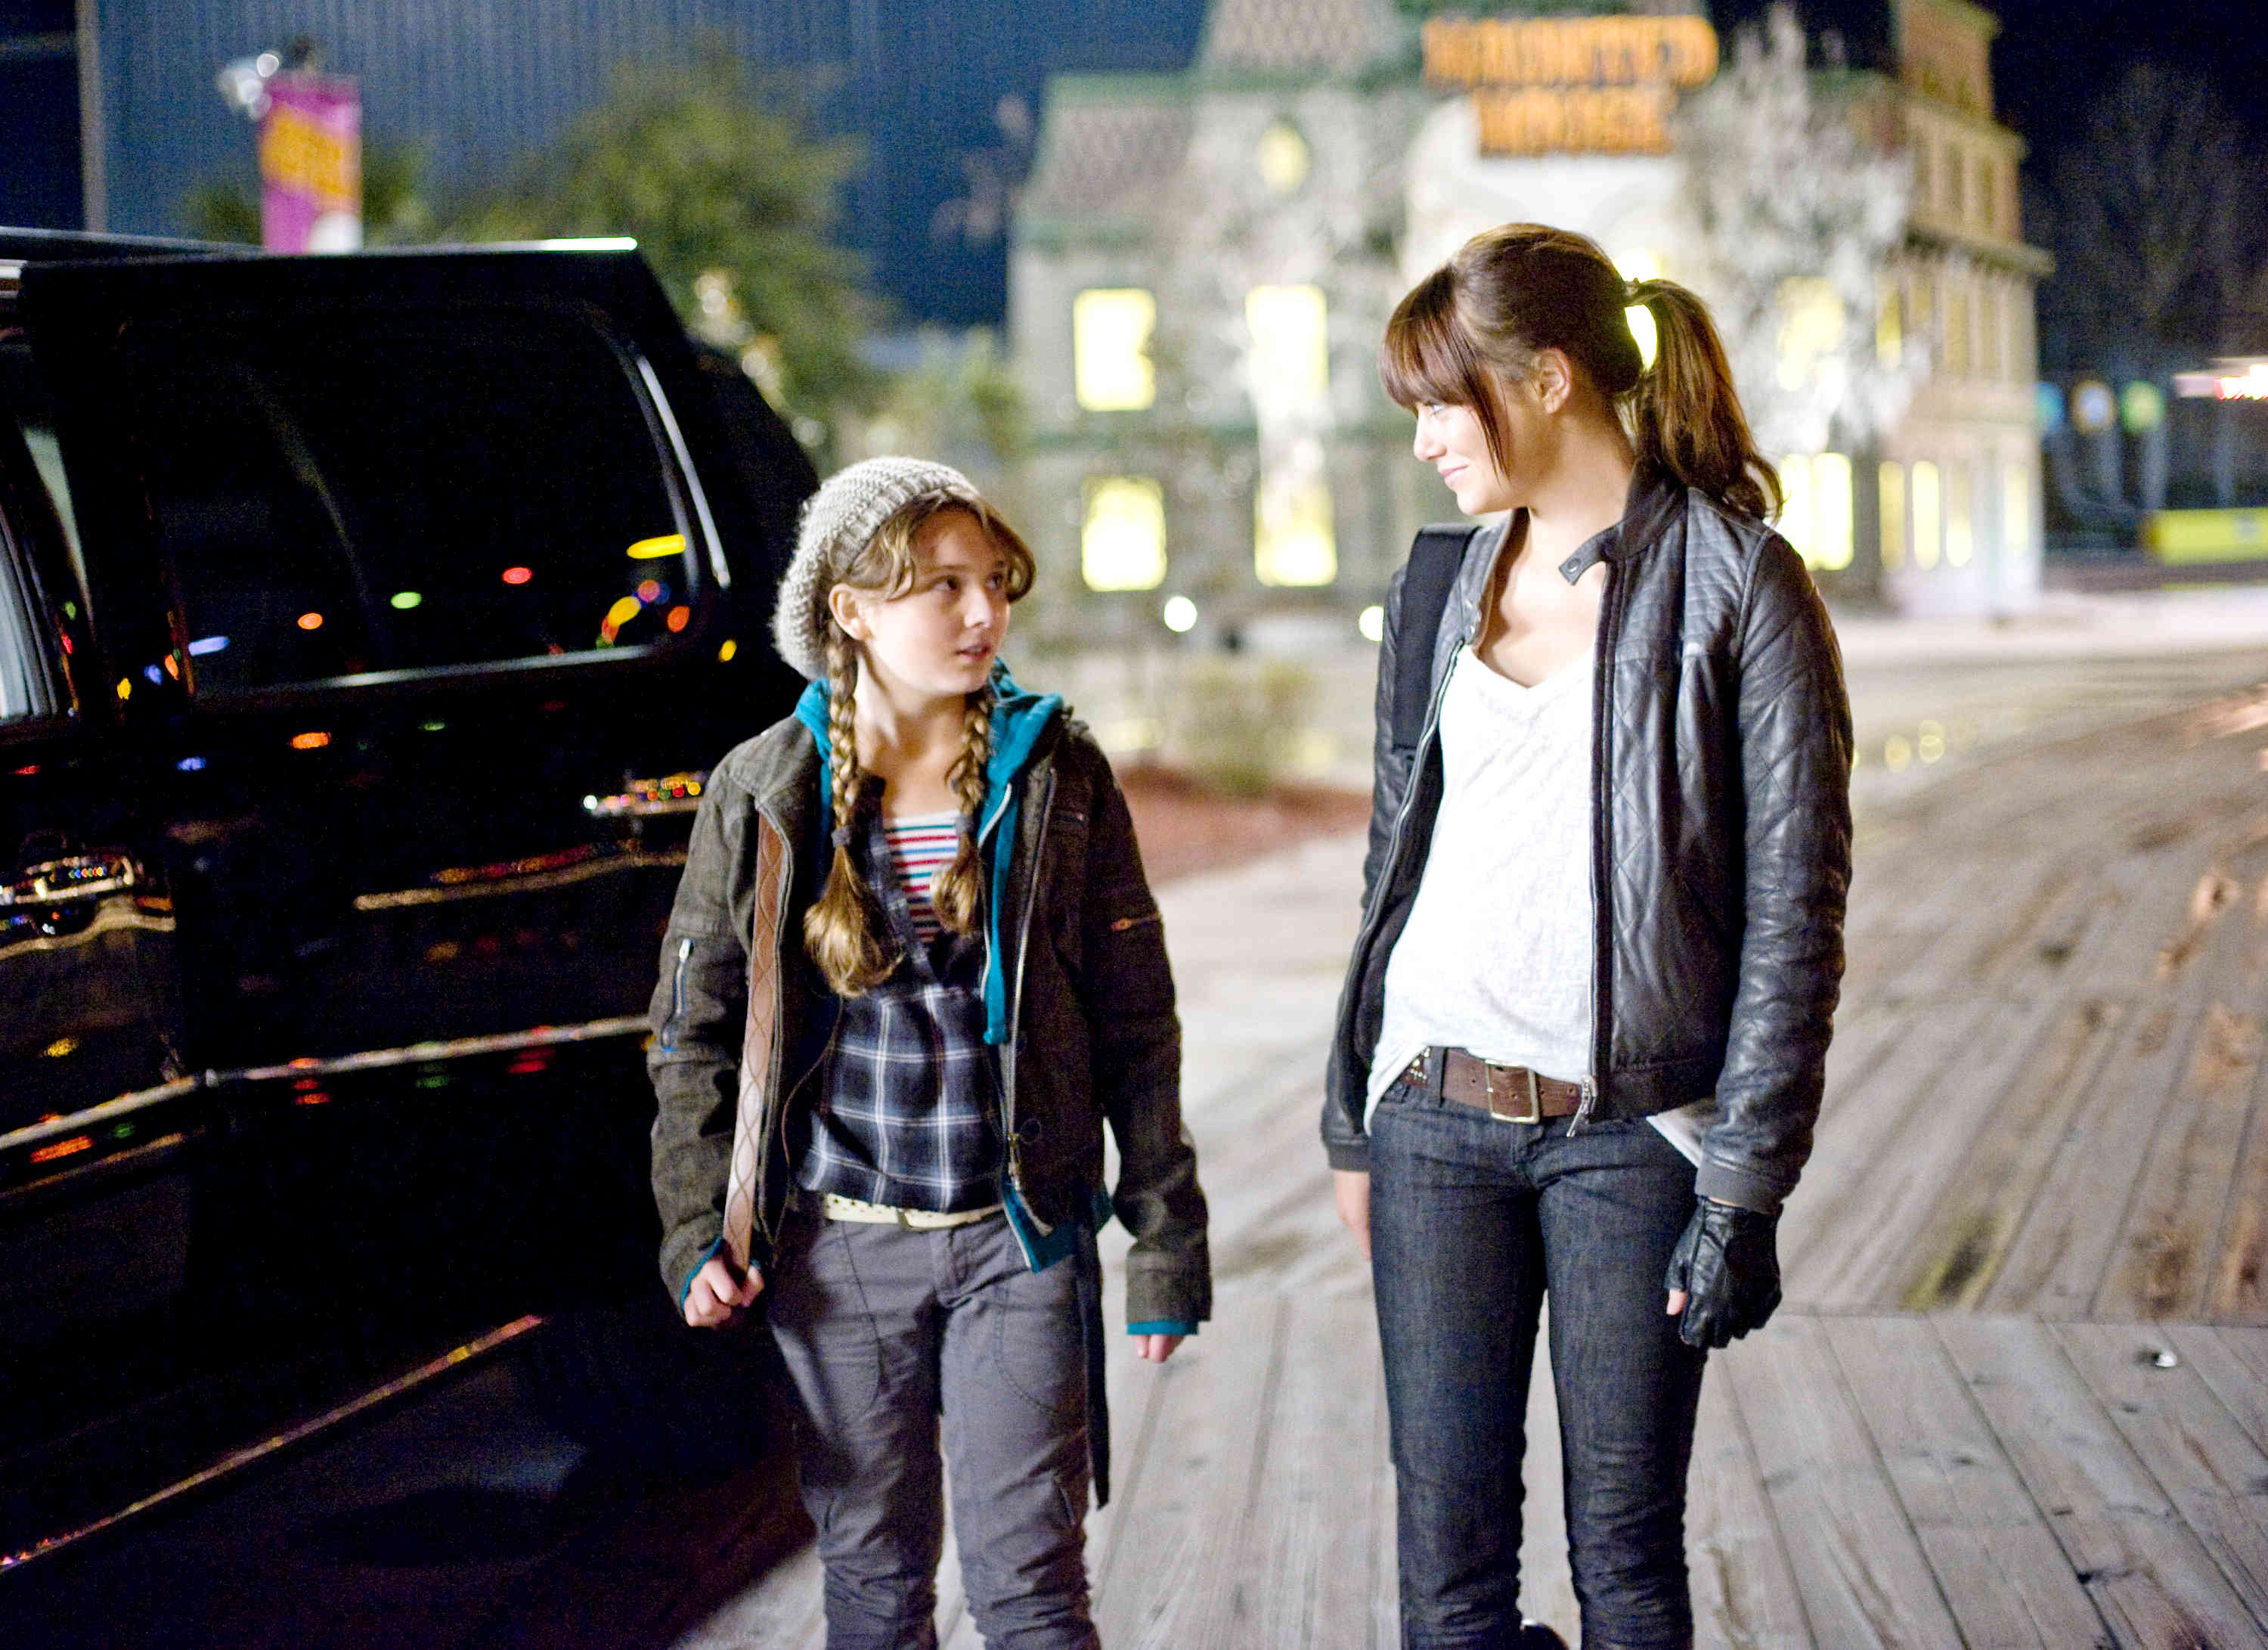 Abigail Breslin stars as Abigail Breslin and Emma Stone stars as Wichita in Columbia Pictures' Zombieland (2009)